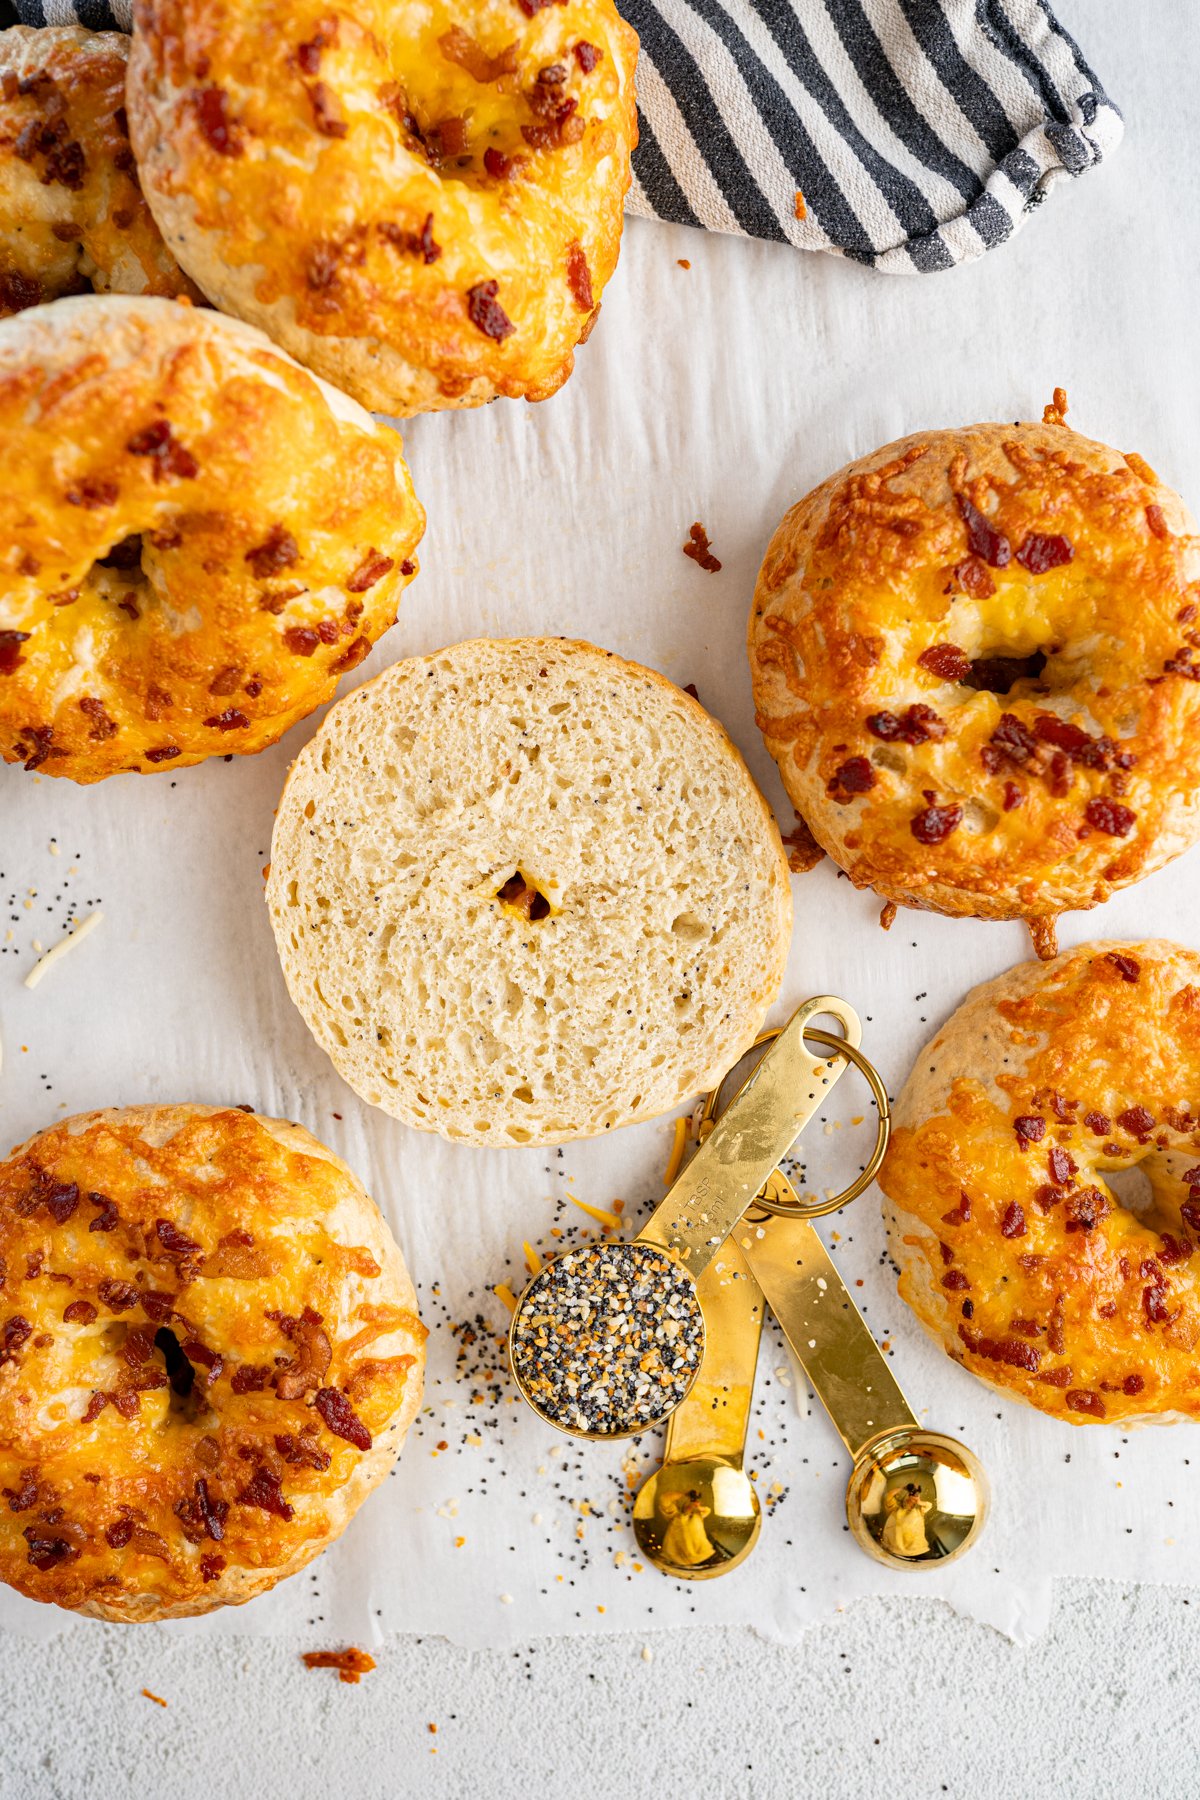 Homemade everything bagels topped with cheddar and bacon. One is sliced in half, exposing the inside. 